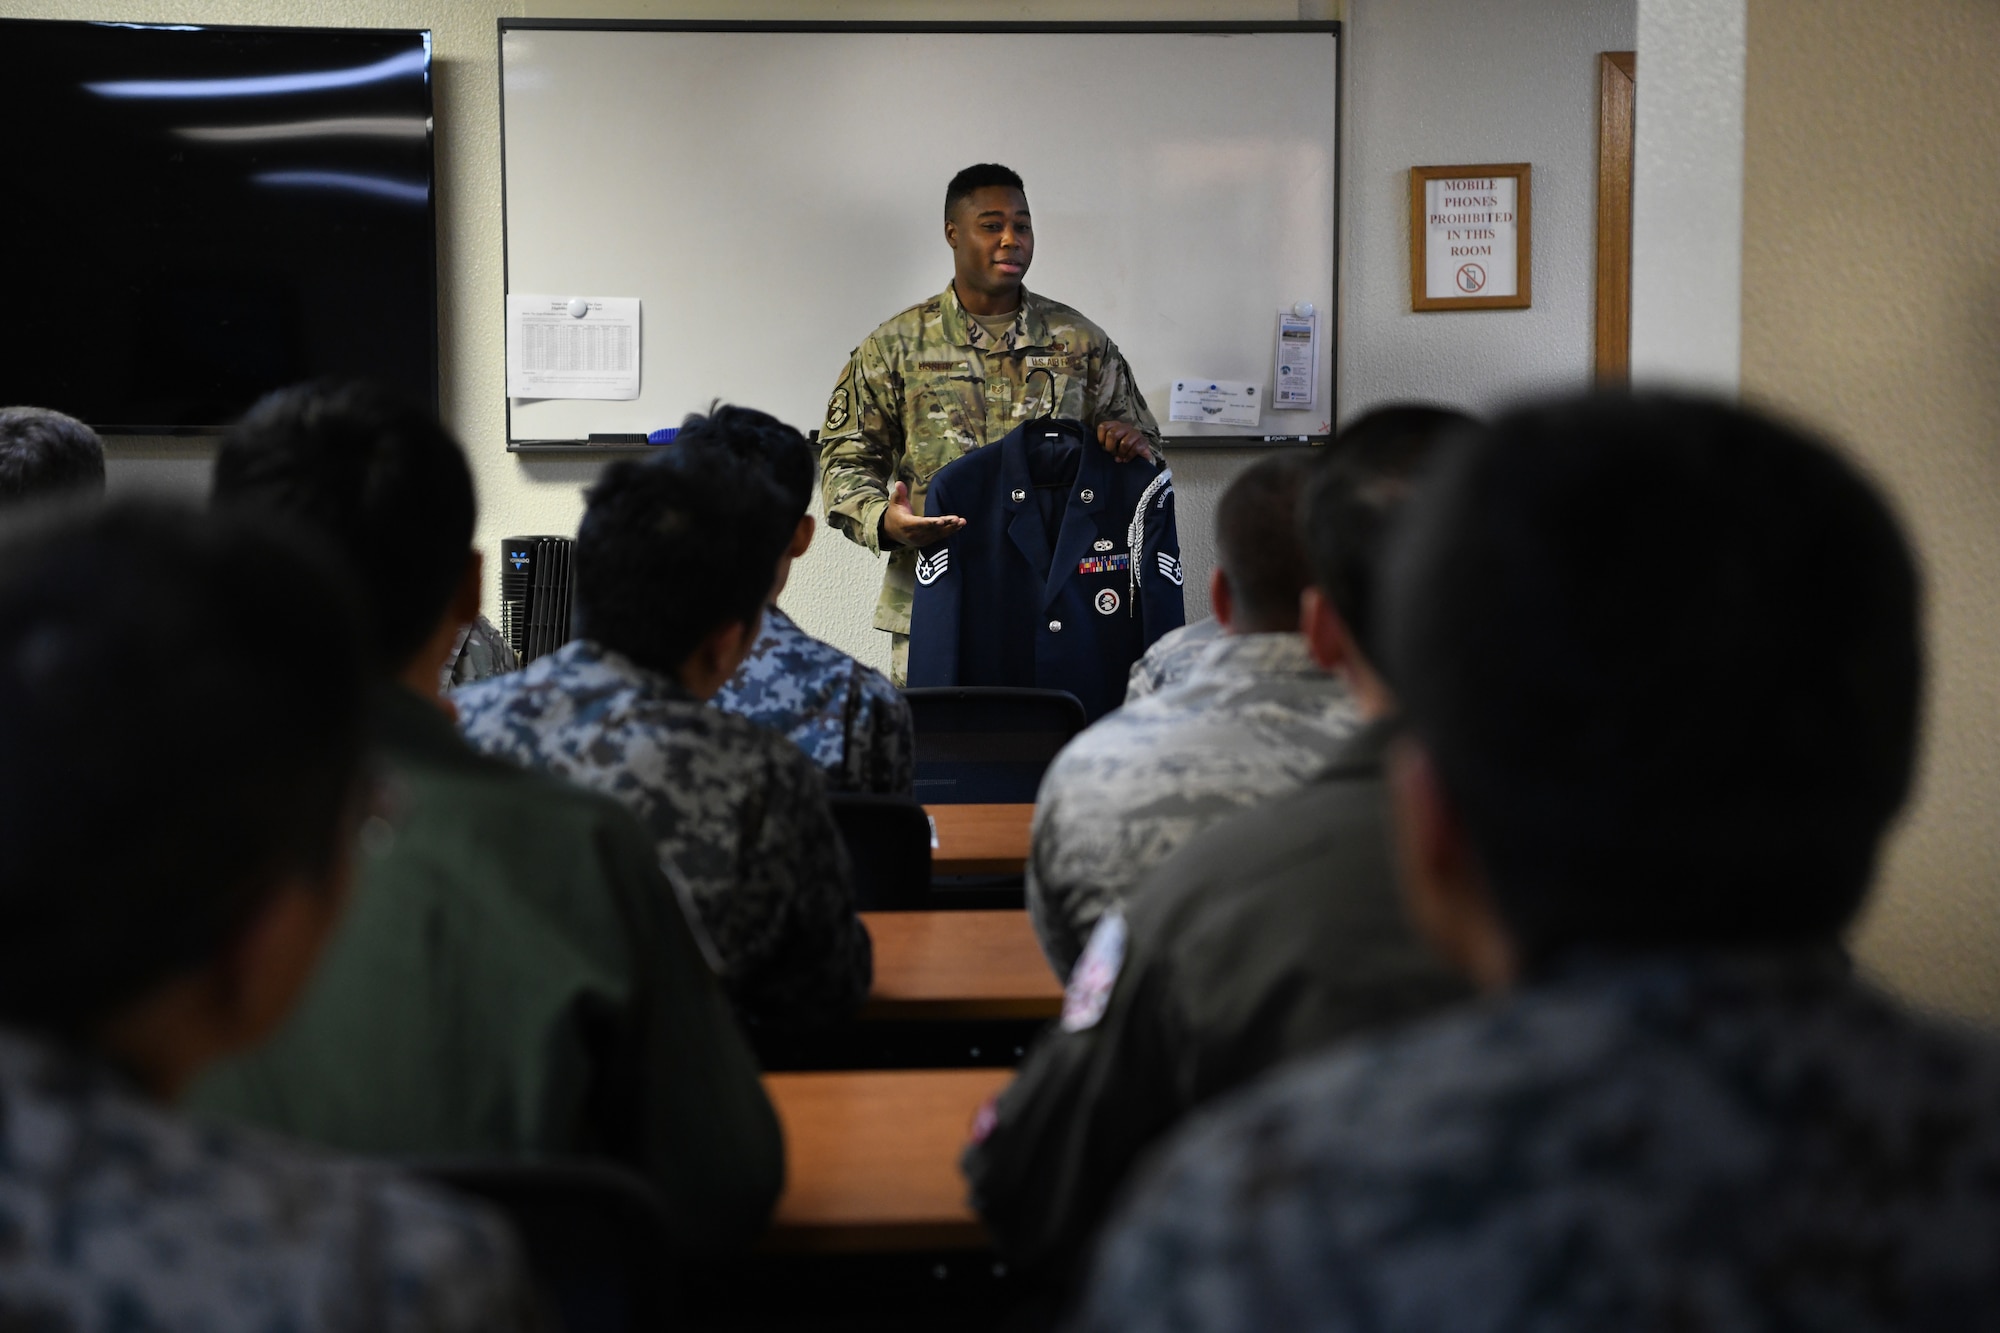 U.S. Air Force Staff Sgt. Calvin Ussery, 18th Force Support Squadron ceremonial guardsman, center, points out the differences in a ceremonial guardsman’s service dress and a regular Airman’s for U.S. Air Force,U.S. Army, and Japanese Self-Defense Force members participating in an NCO Bilateral Exchange program Nov. 15, 2019, at Kadena Air Base, Japan. Bilateral exchanges allow for a better understanding of the capabilities held by each countries Armed Forces, as well as the opportunity to improve relations between the United States and Japan. (U.S. Air Force photo by Senior Airman Rhett Isbell)